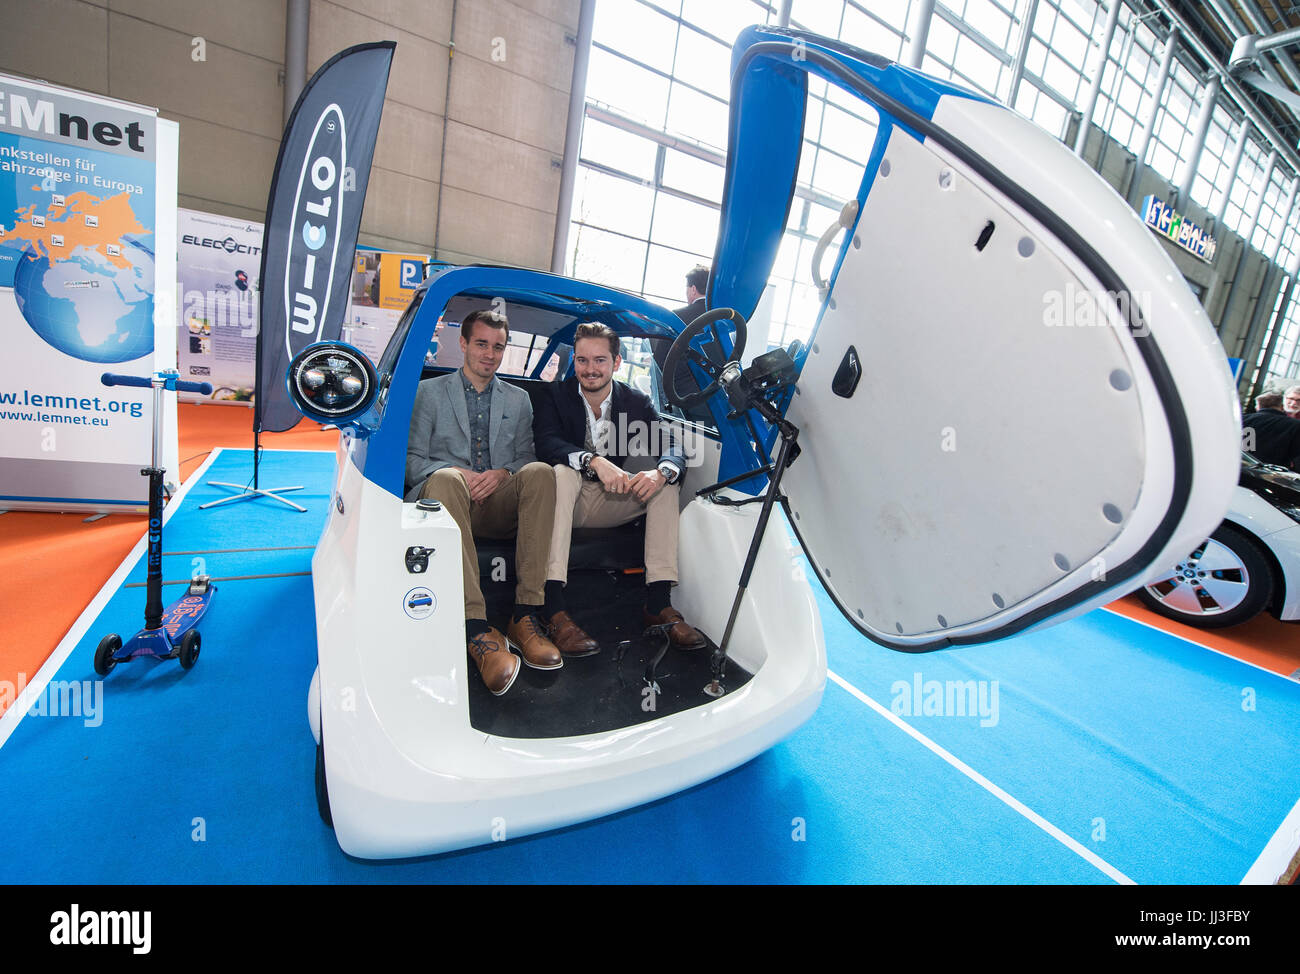 Hanover, Germany. 26th Apr, 2017. Pascal Studerus (L), project manager at Microlino, and Oliver Ouboter, a marketing manager at Micro, in a Micro Microlino e-car at the Hanover Trade Fair 2017 in Hanover, Germany, 26 April 2017. The car is modelled on a 1950s BMW Isetta. 6,500 exhibitors participated in the 2017 Hanover Trade Fair. The partner nation was Poland. Photo: Silas Stein/dpa/Alamy Live News Stock Photo